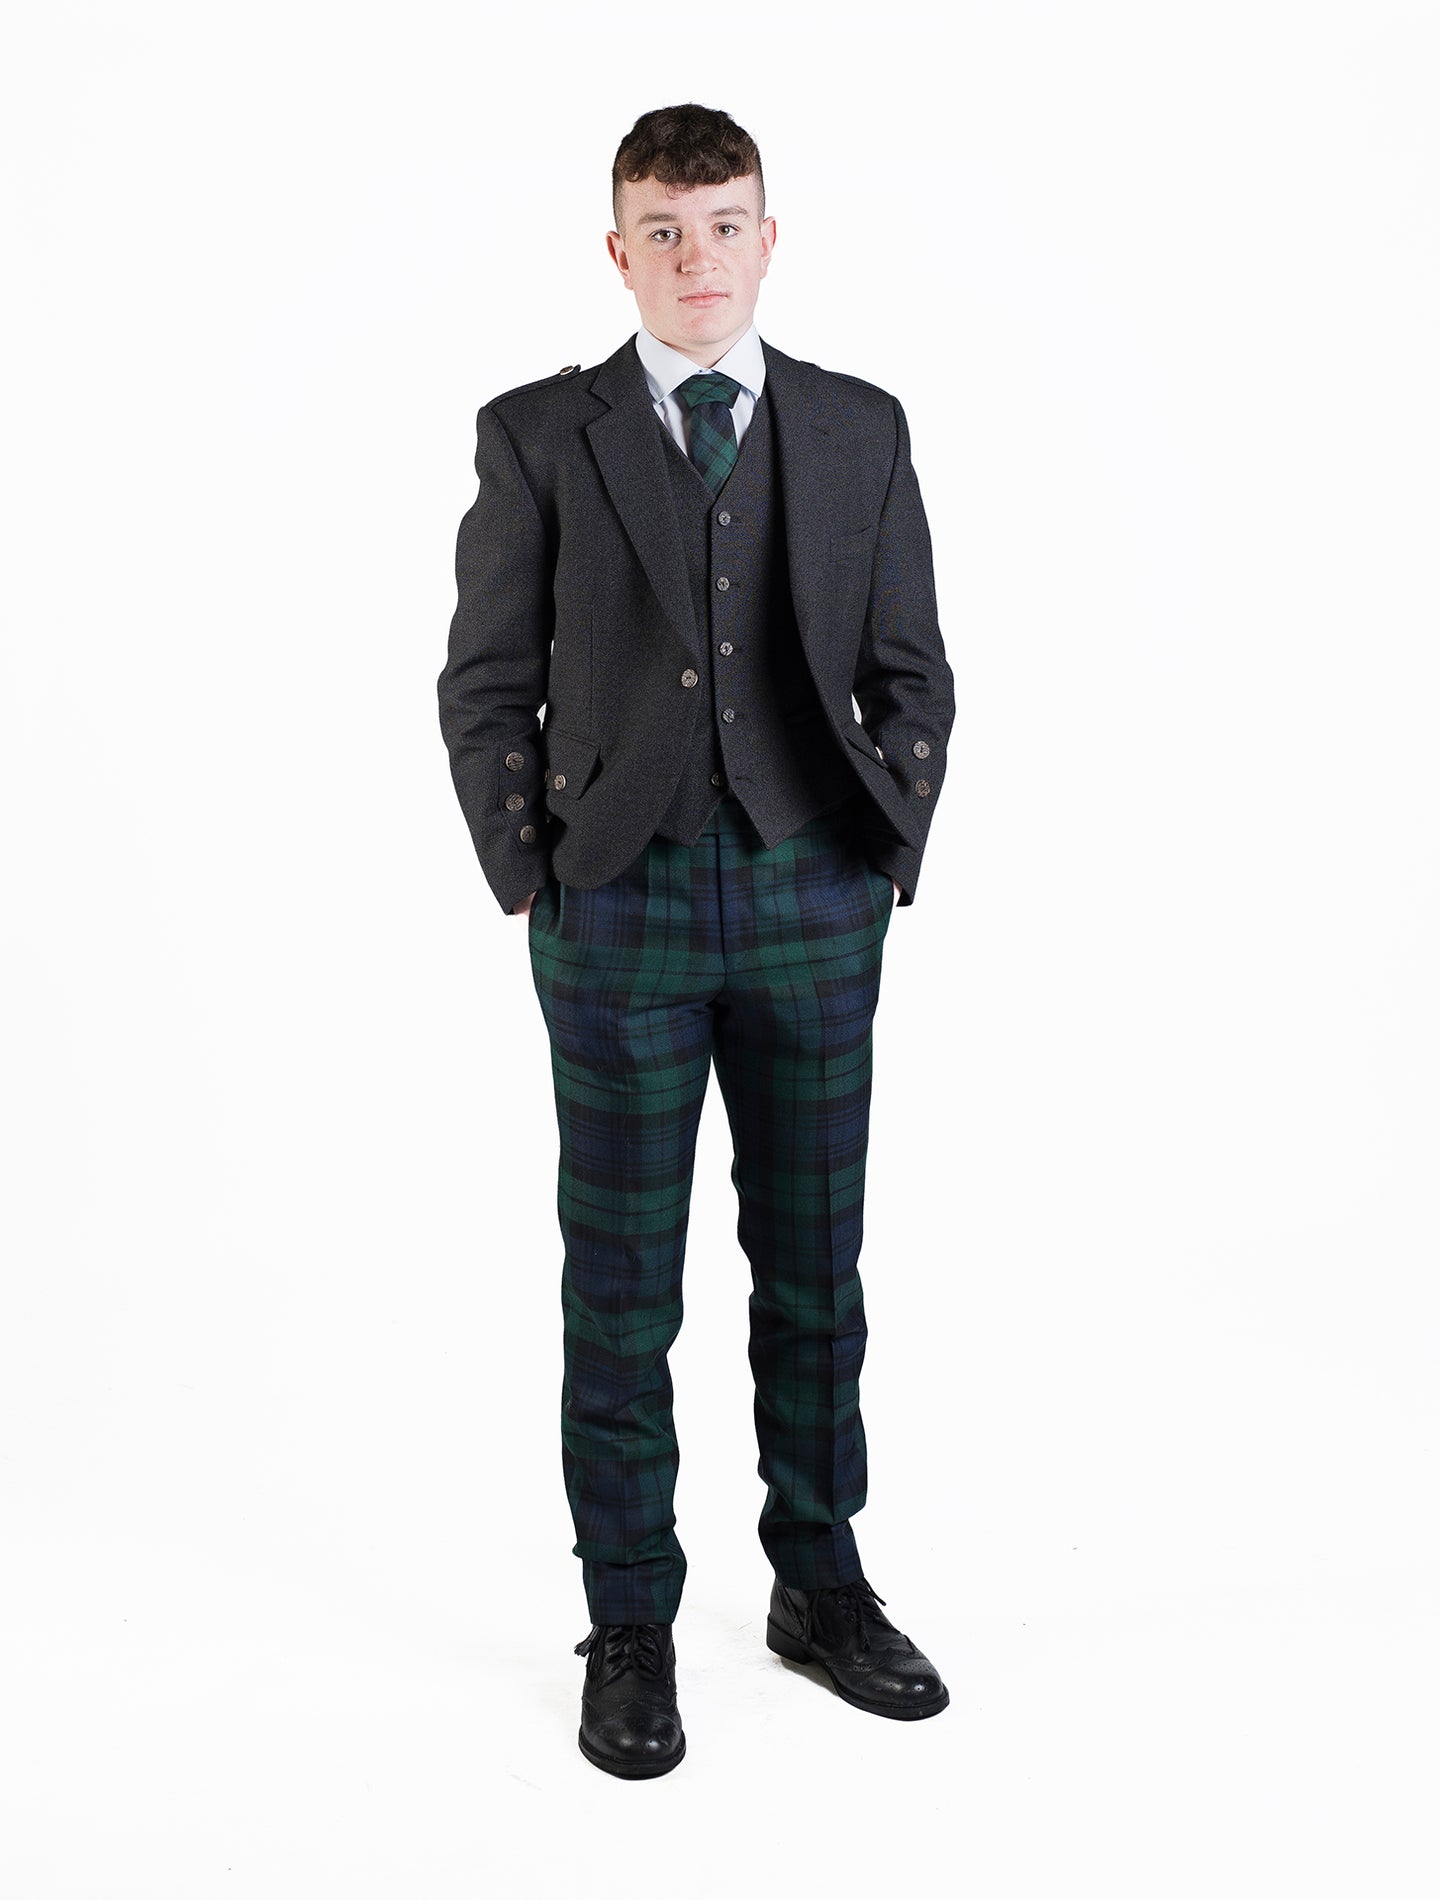 Black Watch Trews / Charcoal Holyrood Hire Outfit